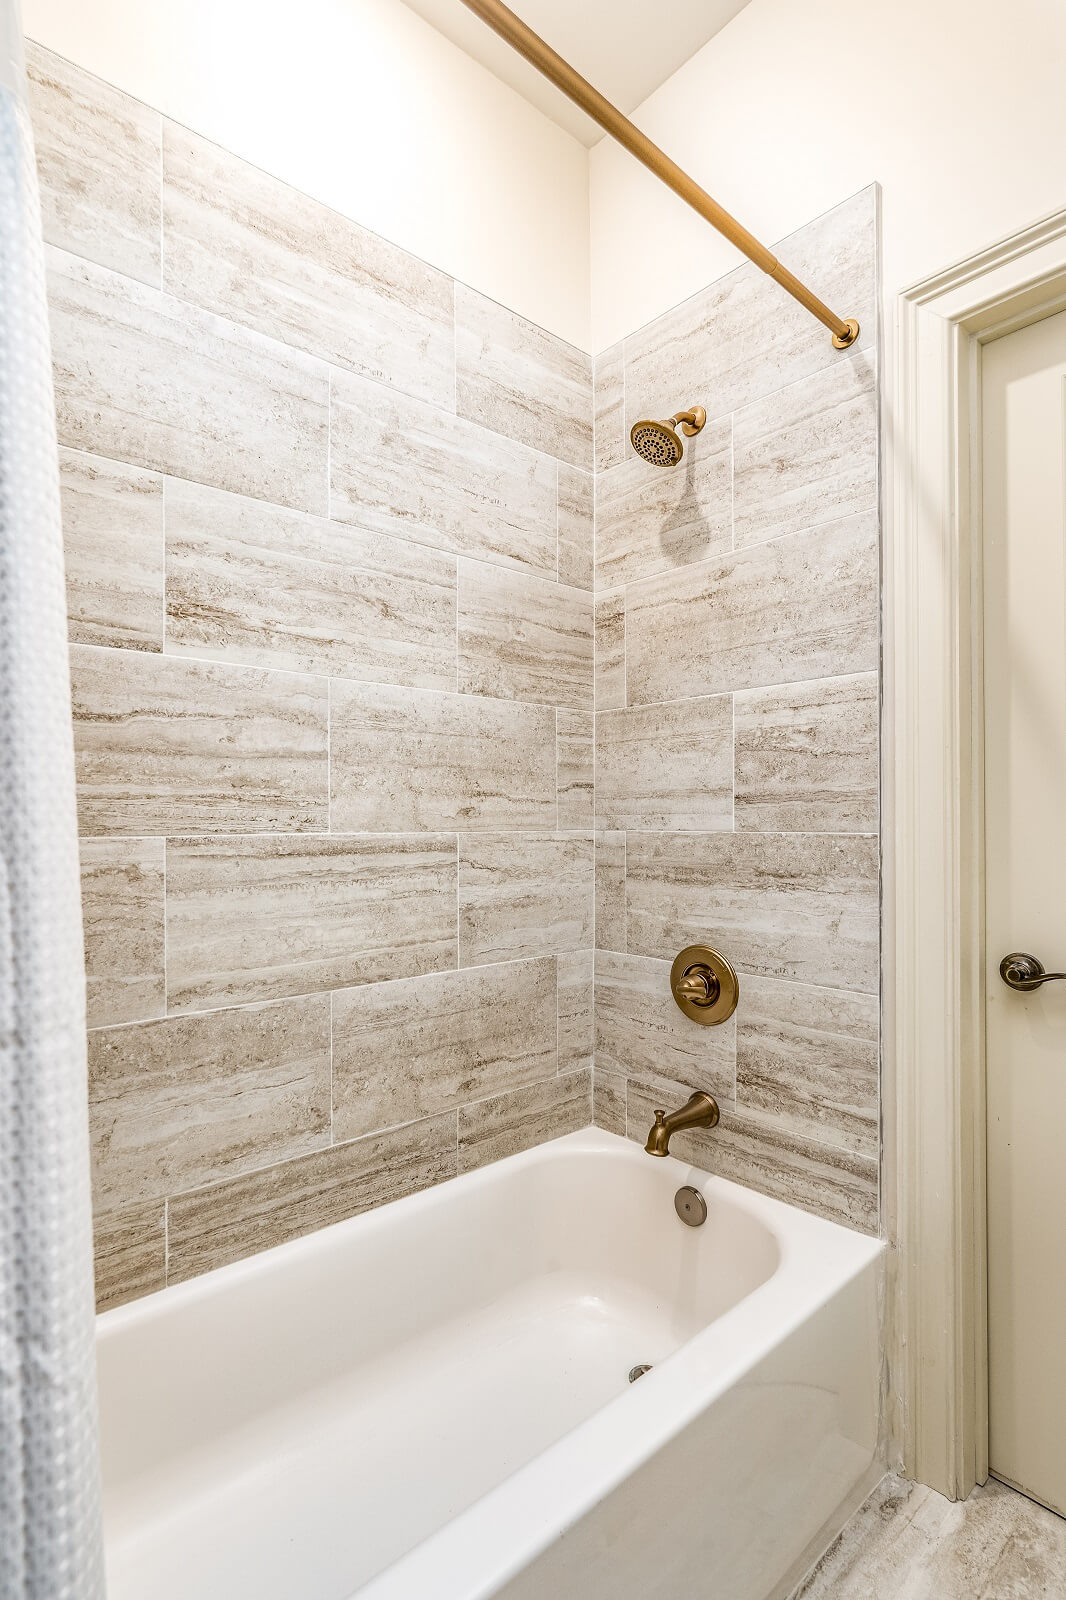 The Alexandre Unit 403 shower, a New Orleans luxury rental.